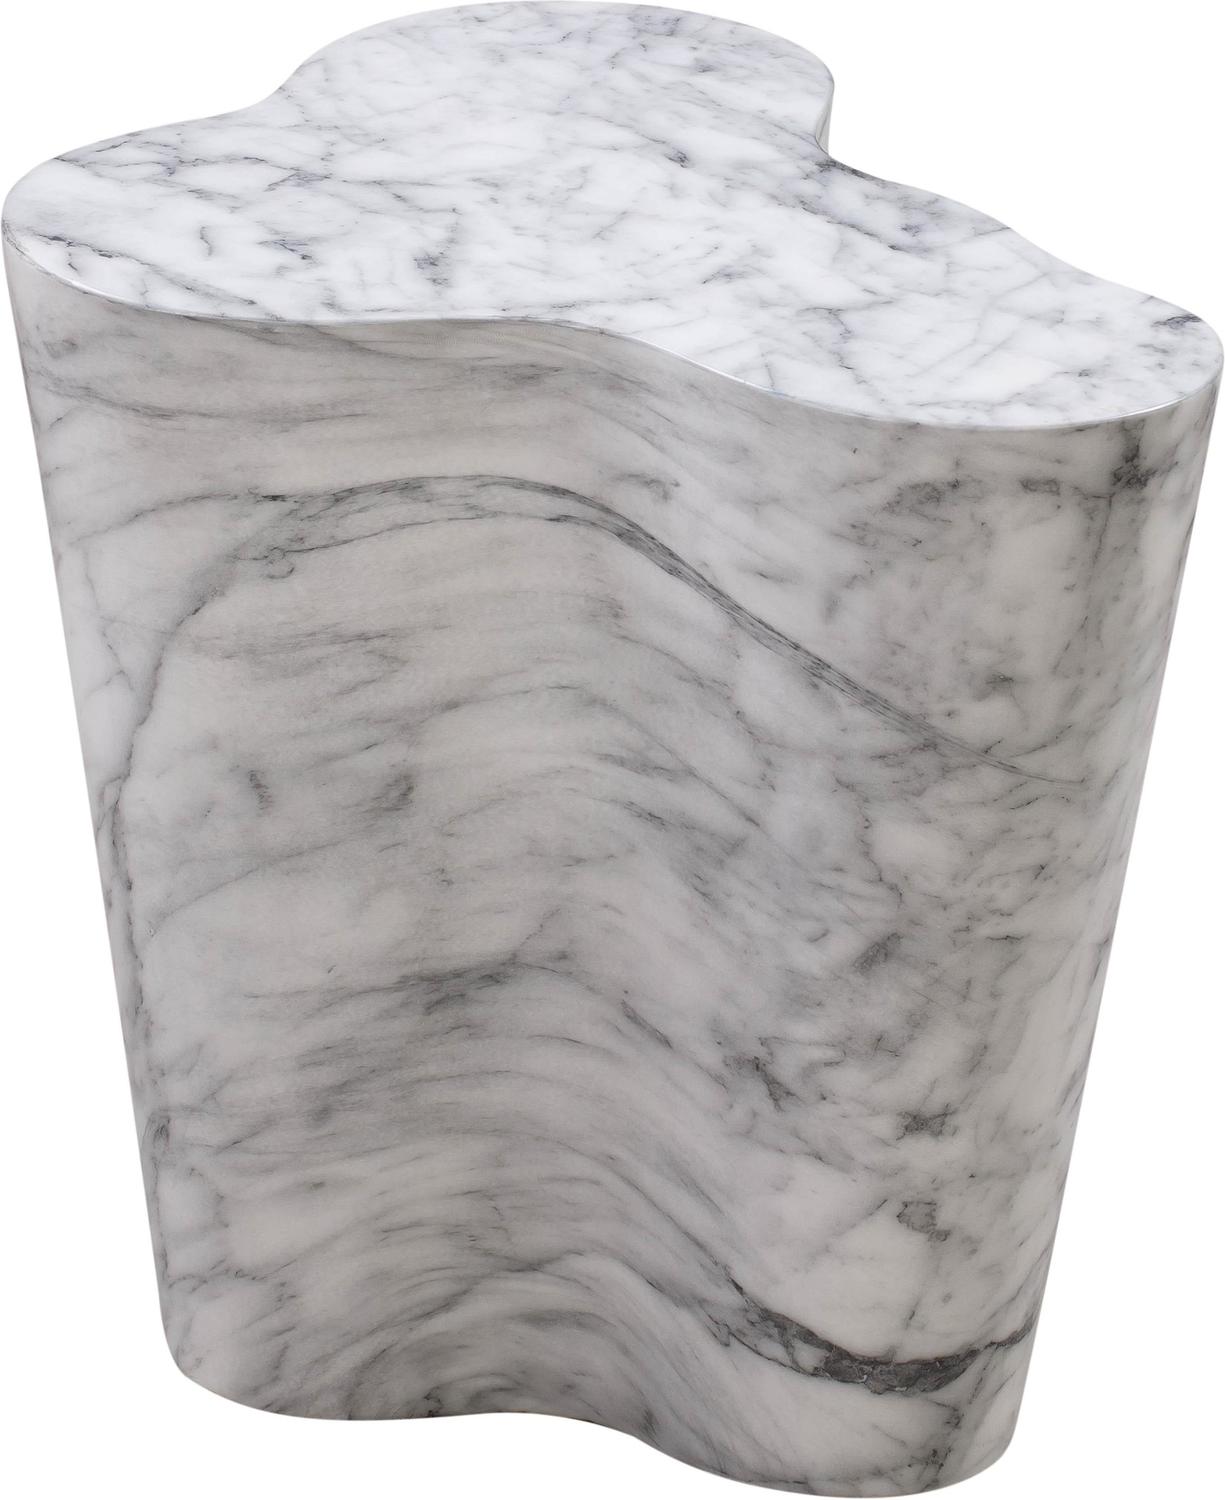 mid century modern console Contemporary Design Furniture Side Tables White Marble